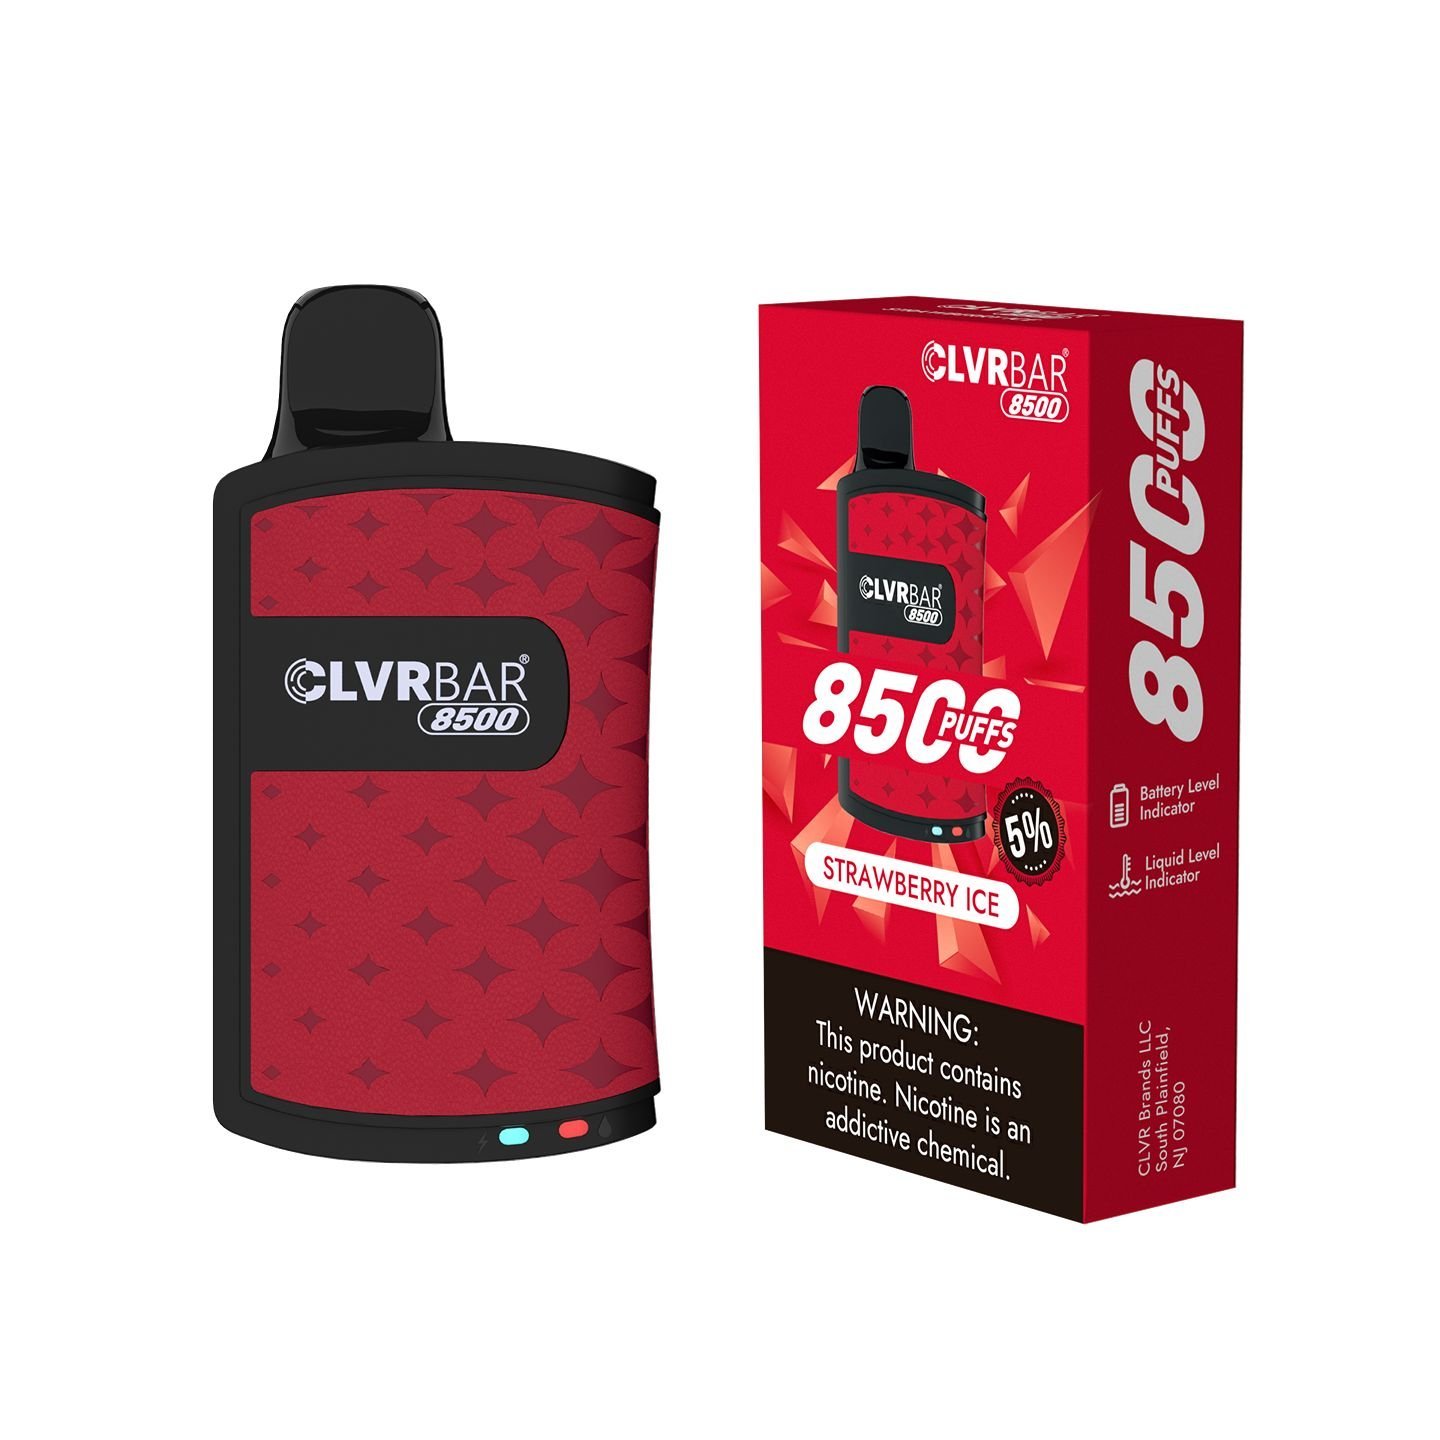 CLVRBAR disposable device 8500 Puffs- Strawberry Ice